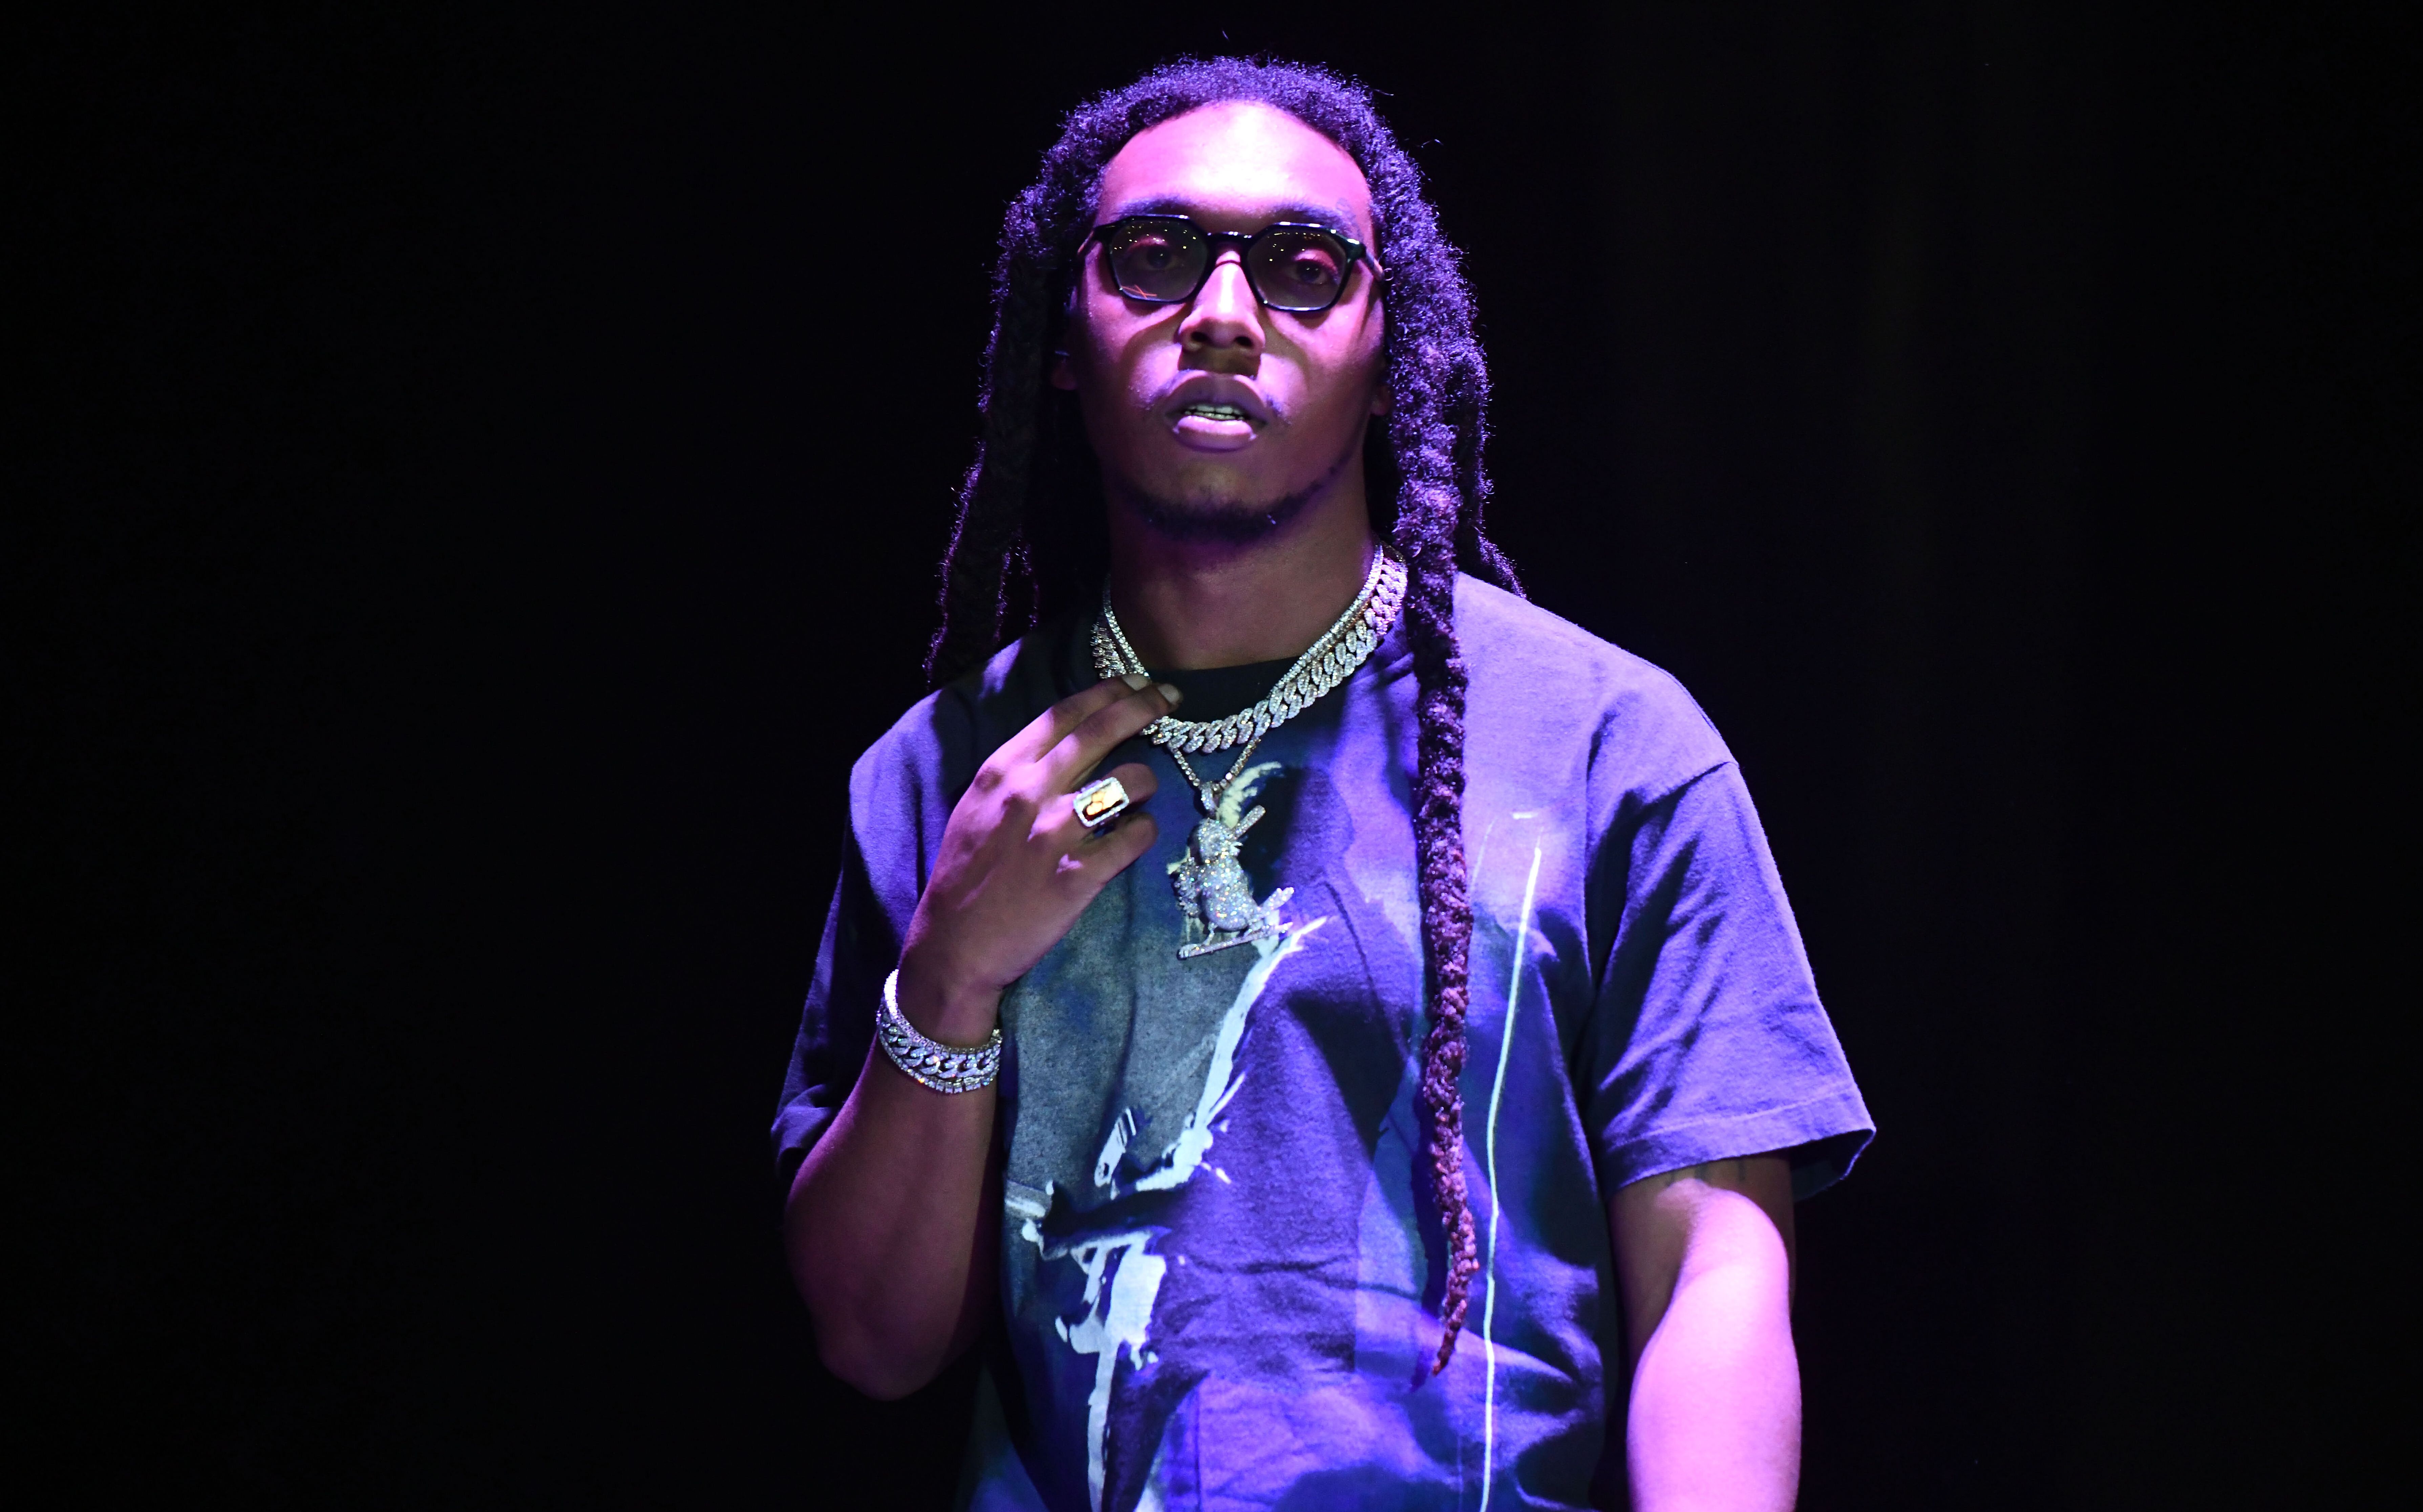 Rapper Takeoff from the hip hop group Migos performs in 2019 in Anaheim, California. Credit: Scott Dudelson via Getty Images